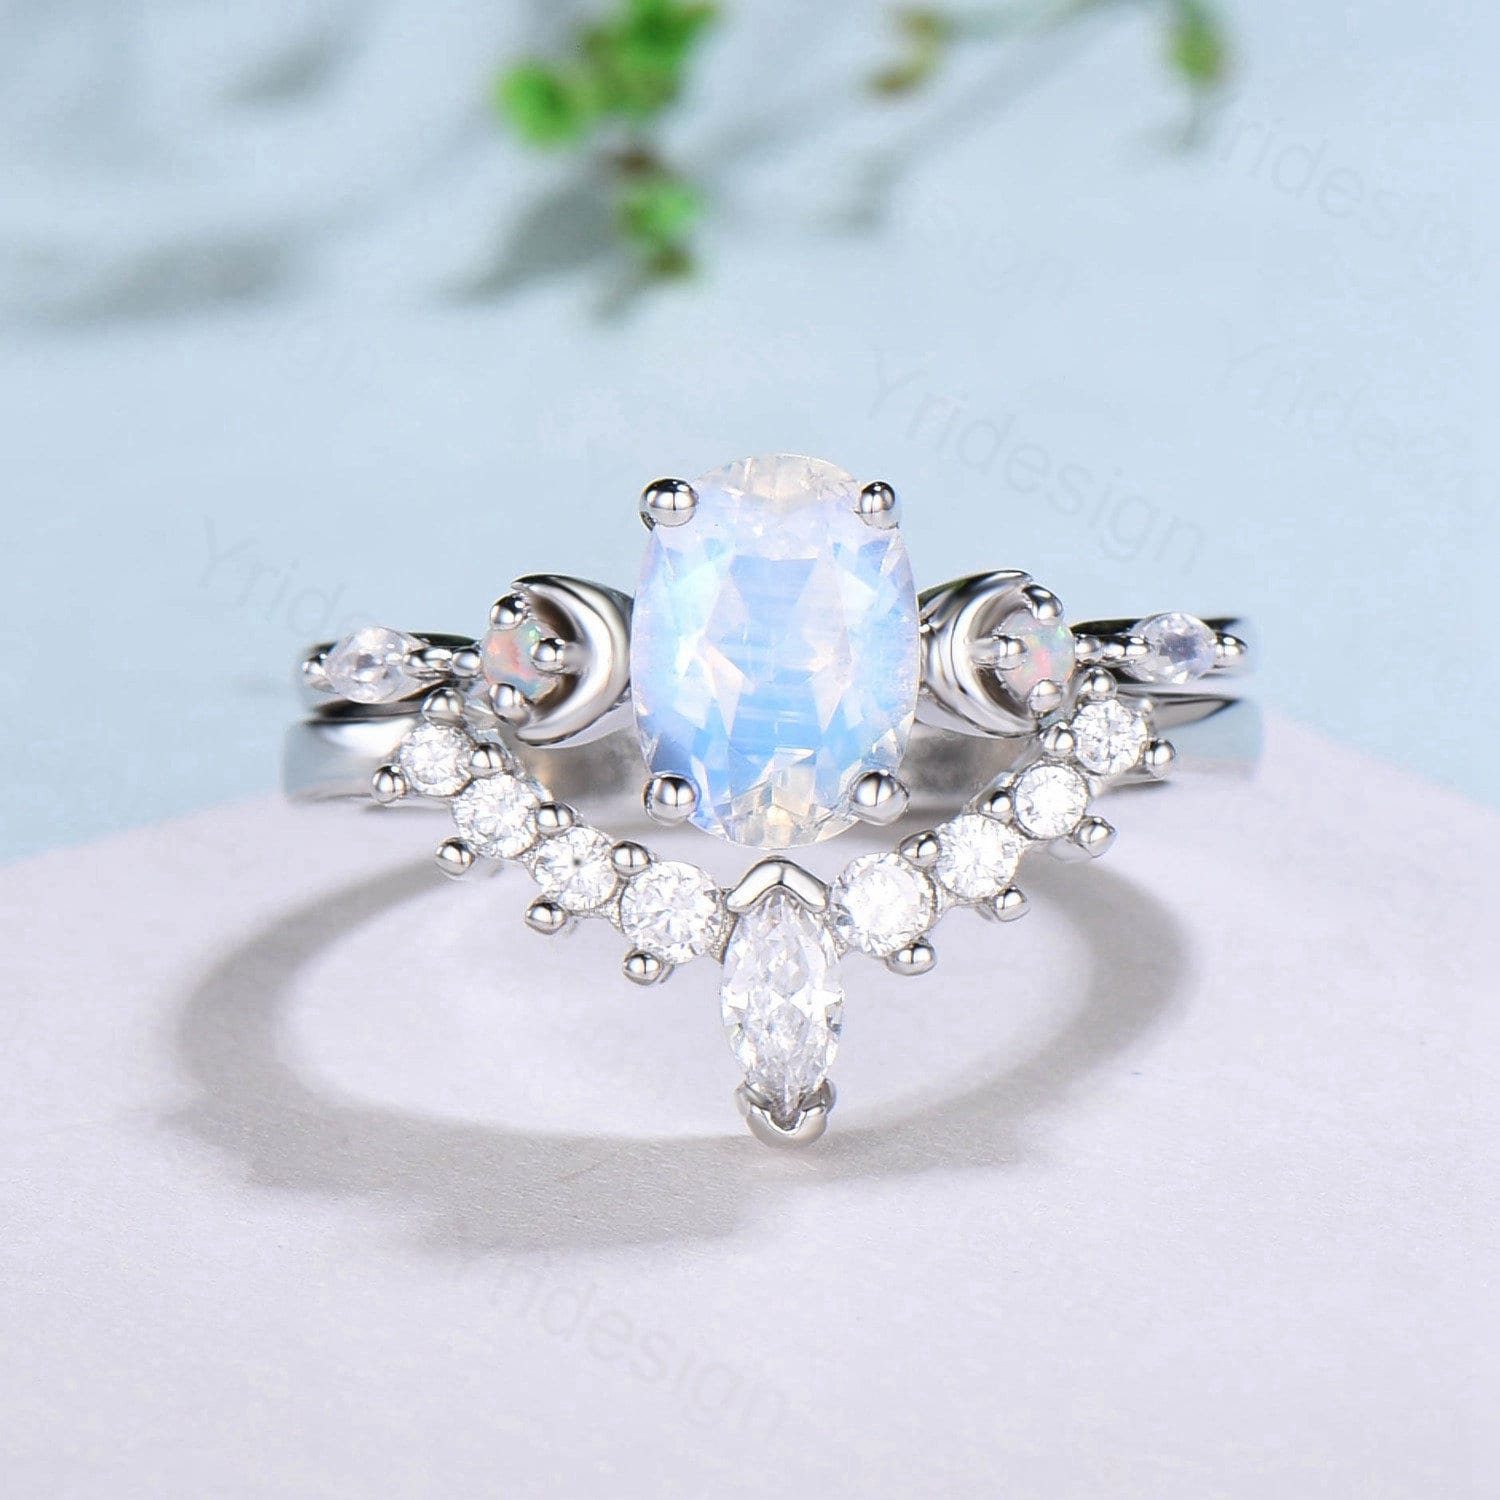 Vintage 1.5CT Oval Moonstone Engagement Ring Set Marquise Moonstone Opal Moon Wedding Ring Set Art Deco Stacking Anniversary Ring For Women - PENFINE